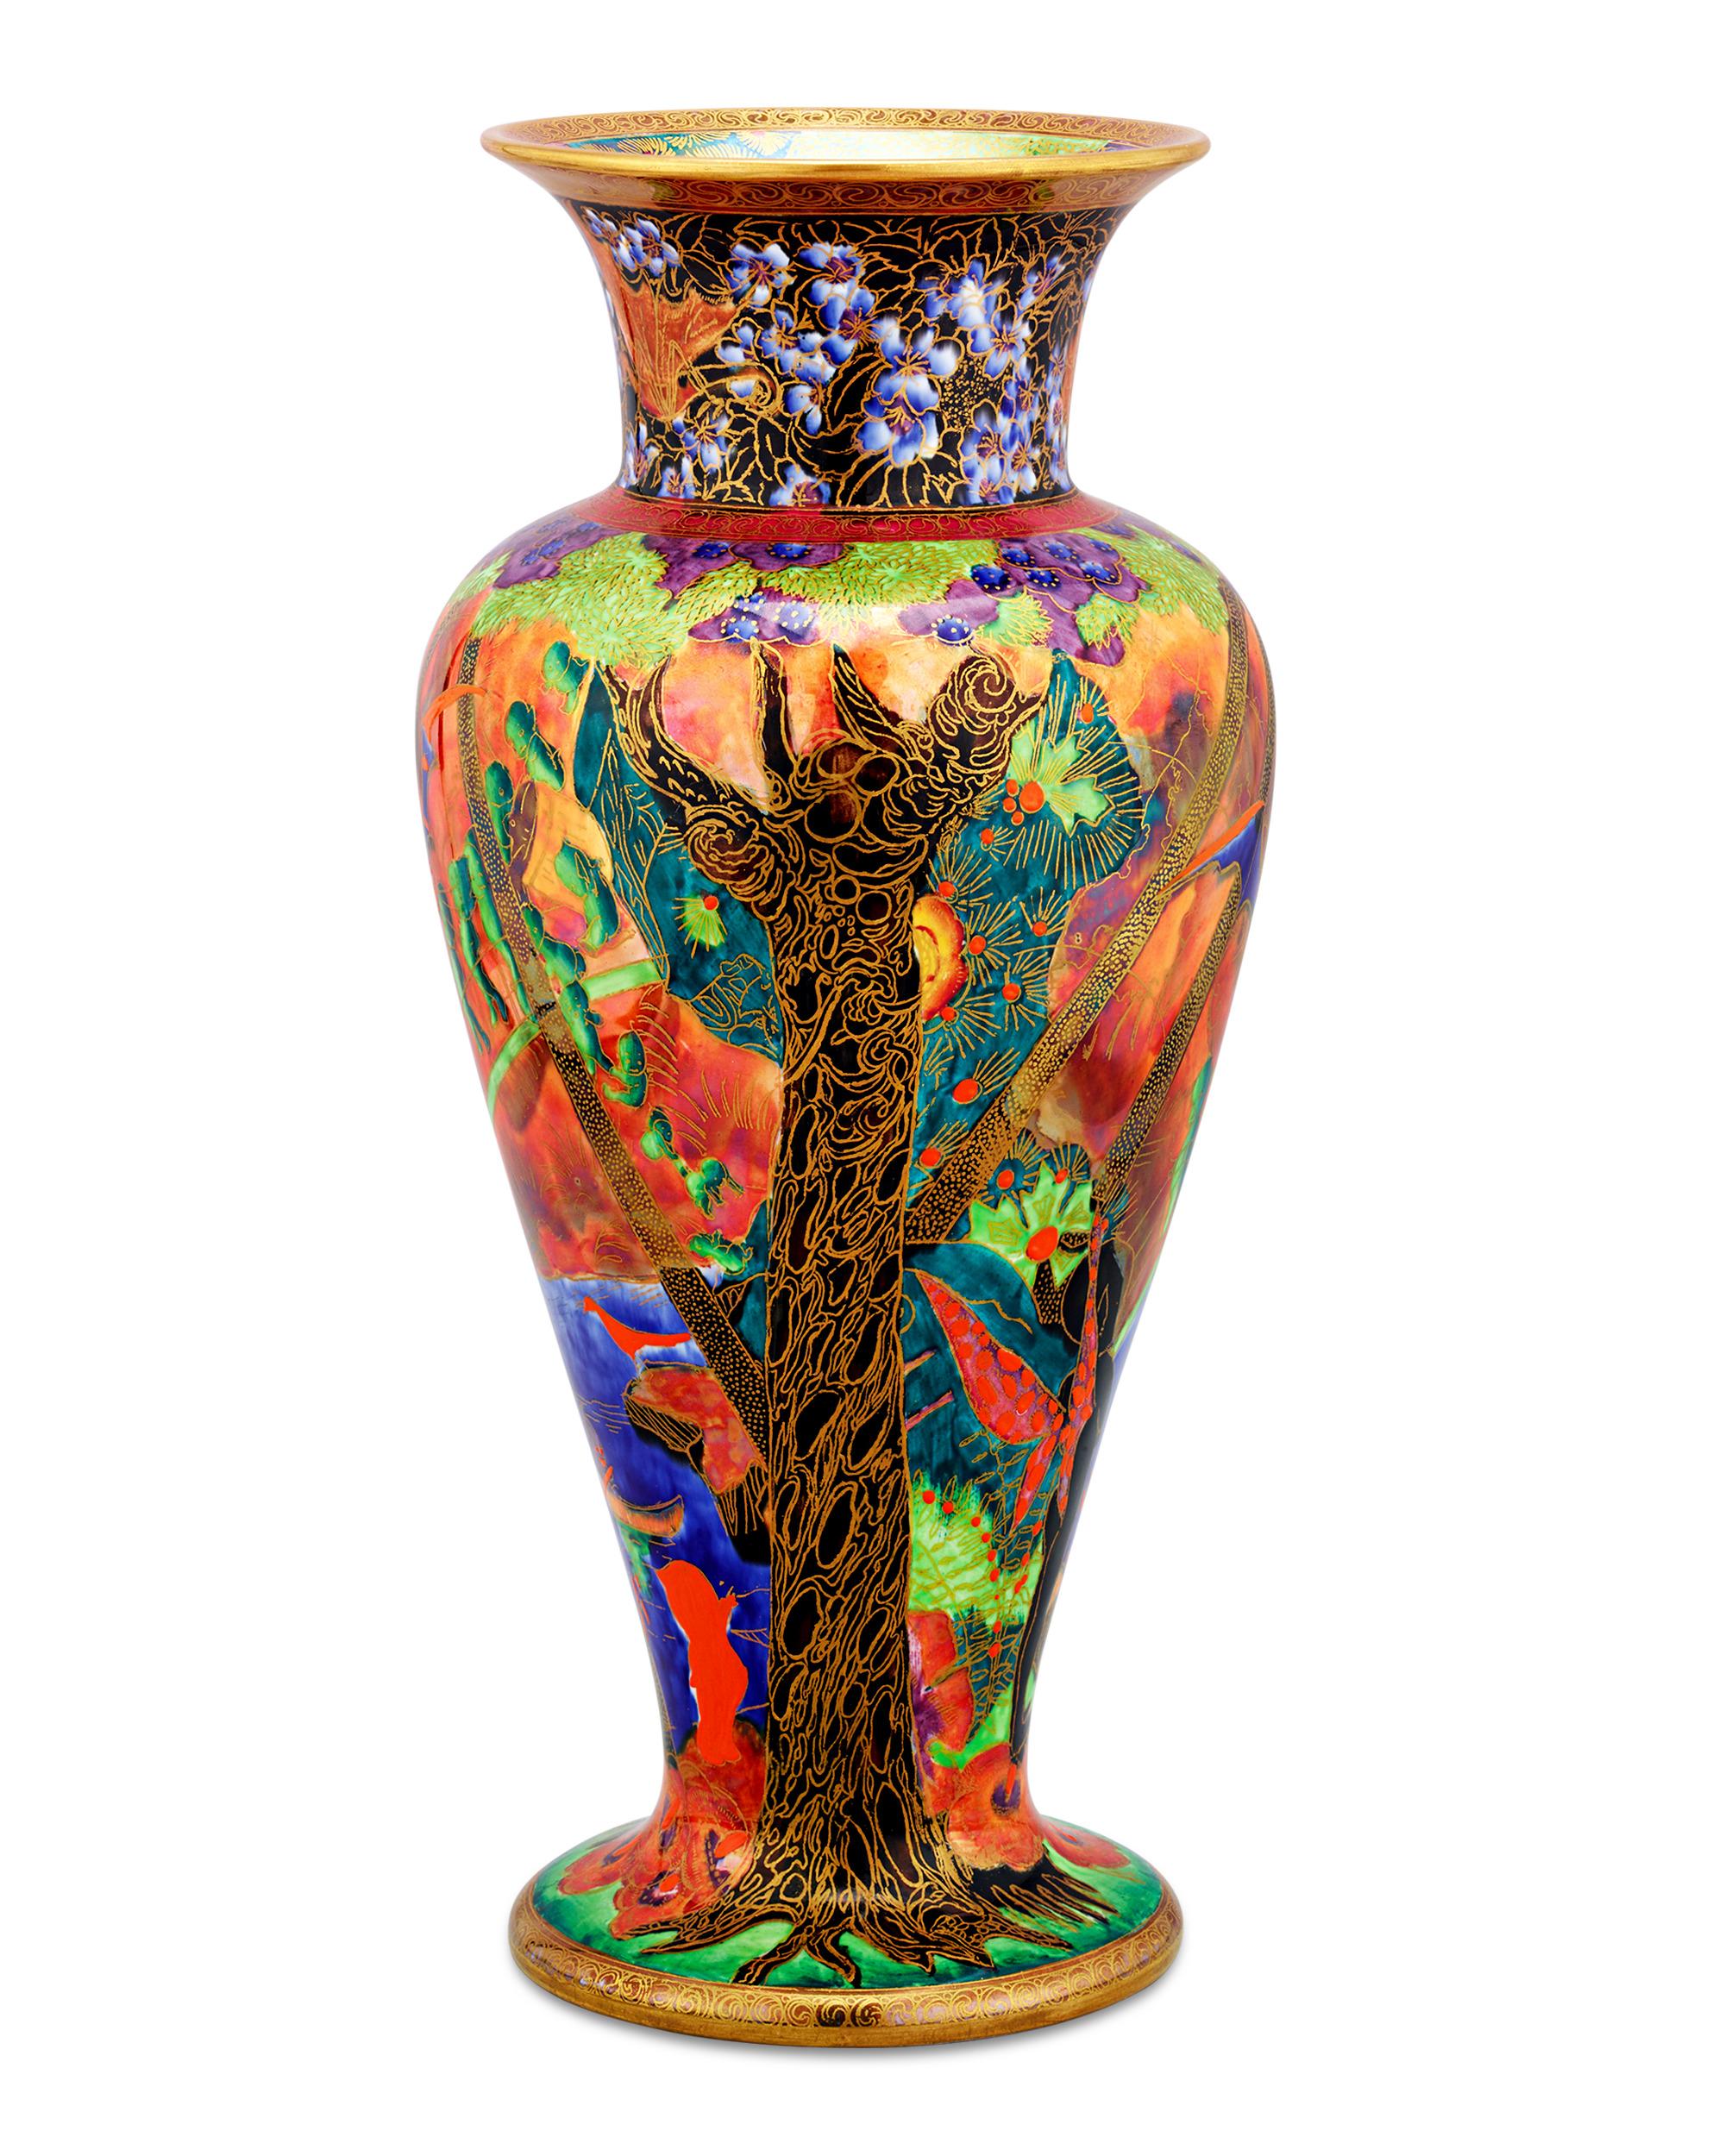 This rare Flame Fairyland Lustre vase by Wedgwood features the fantastic Imps on a Bridge and Treehouse design, one of the most popular created in the enchanting collection. The imaginative motif depicts a bat-like Roc bird gliding above a line of